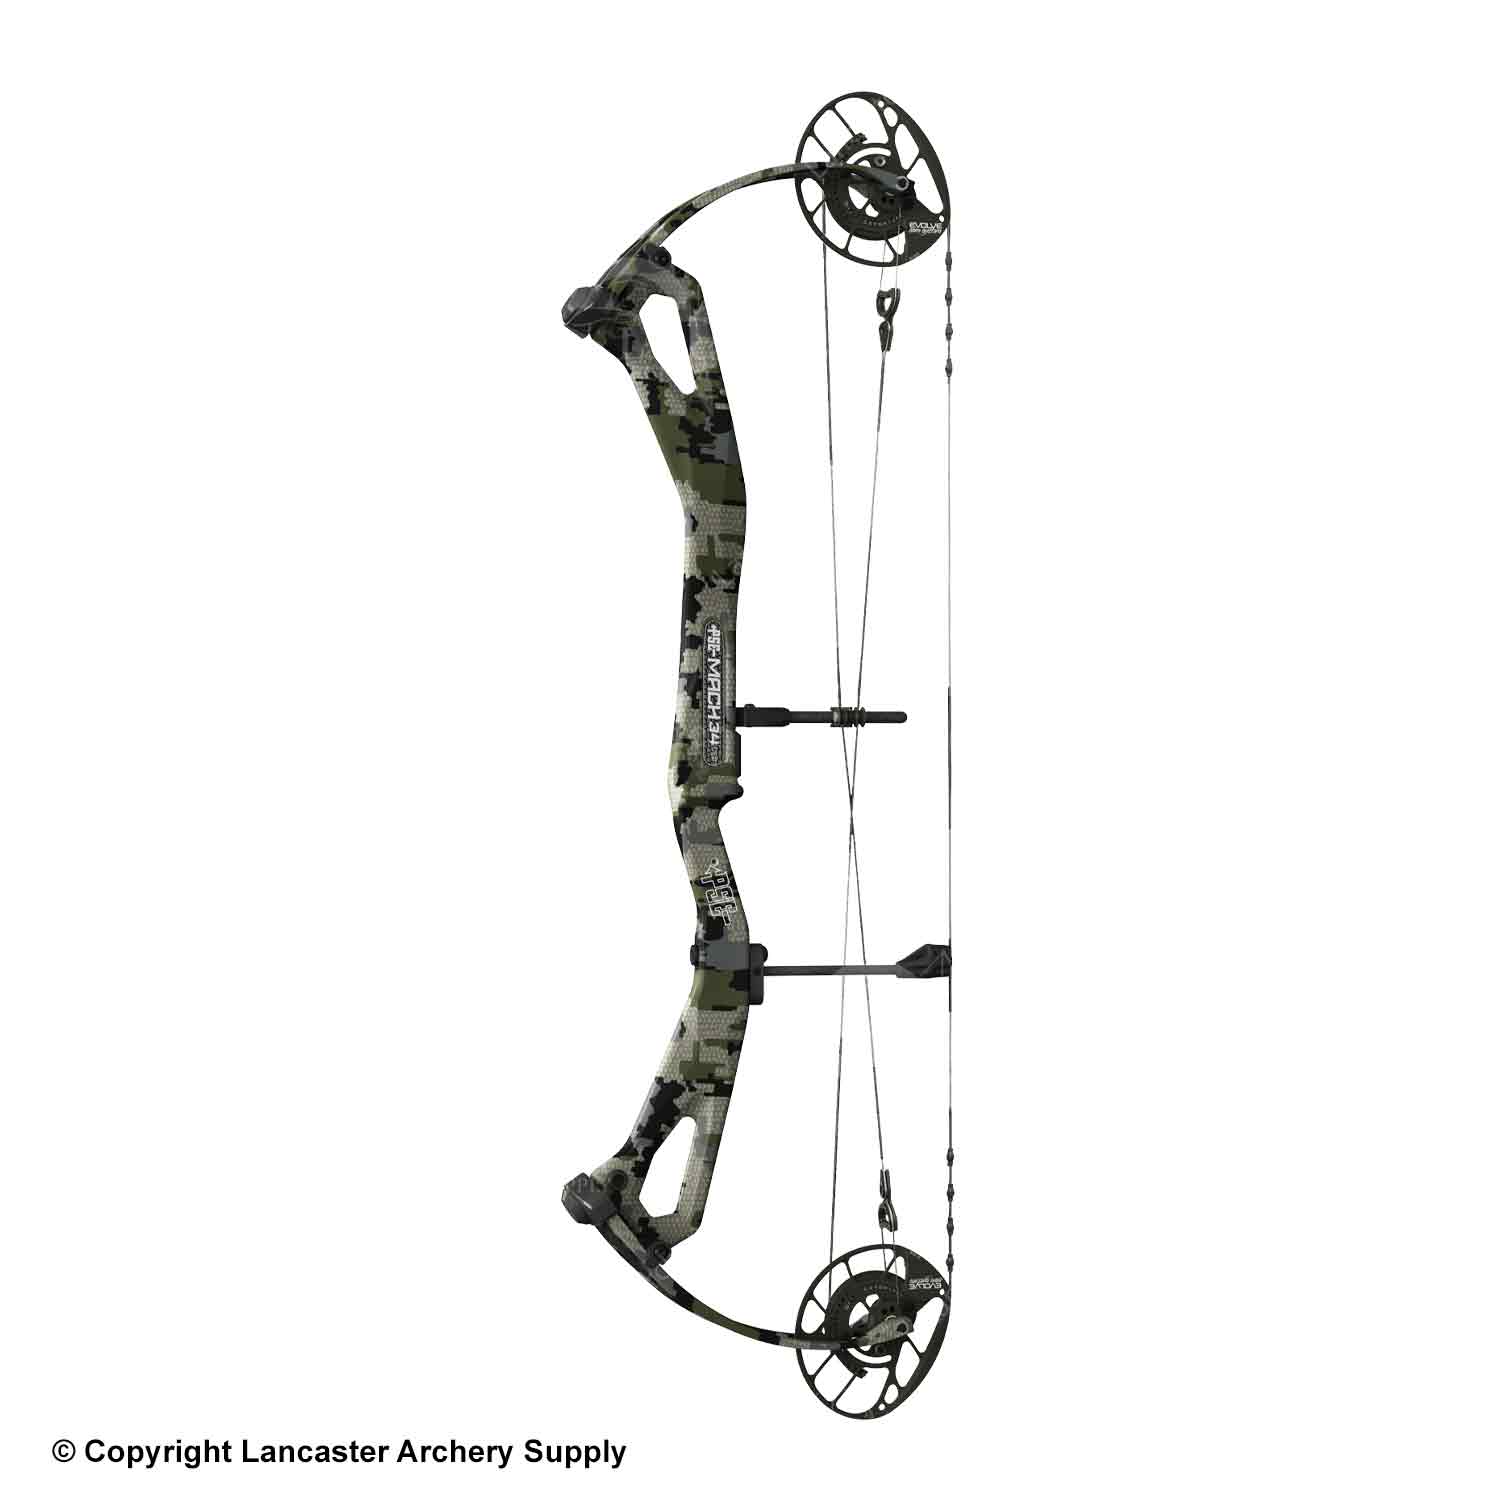 PSE Mach 34 Carbon Compound Hunting Bow (EC)